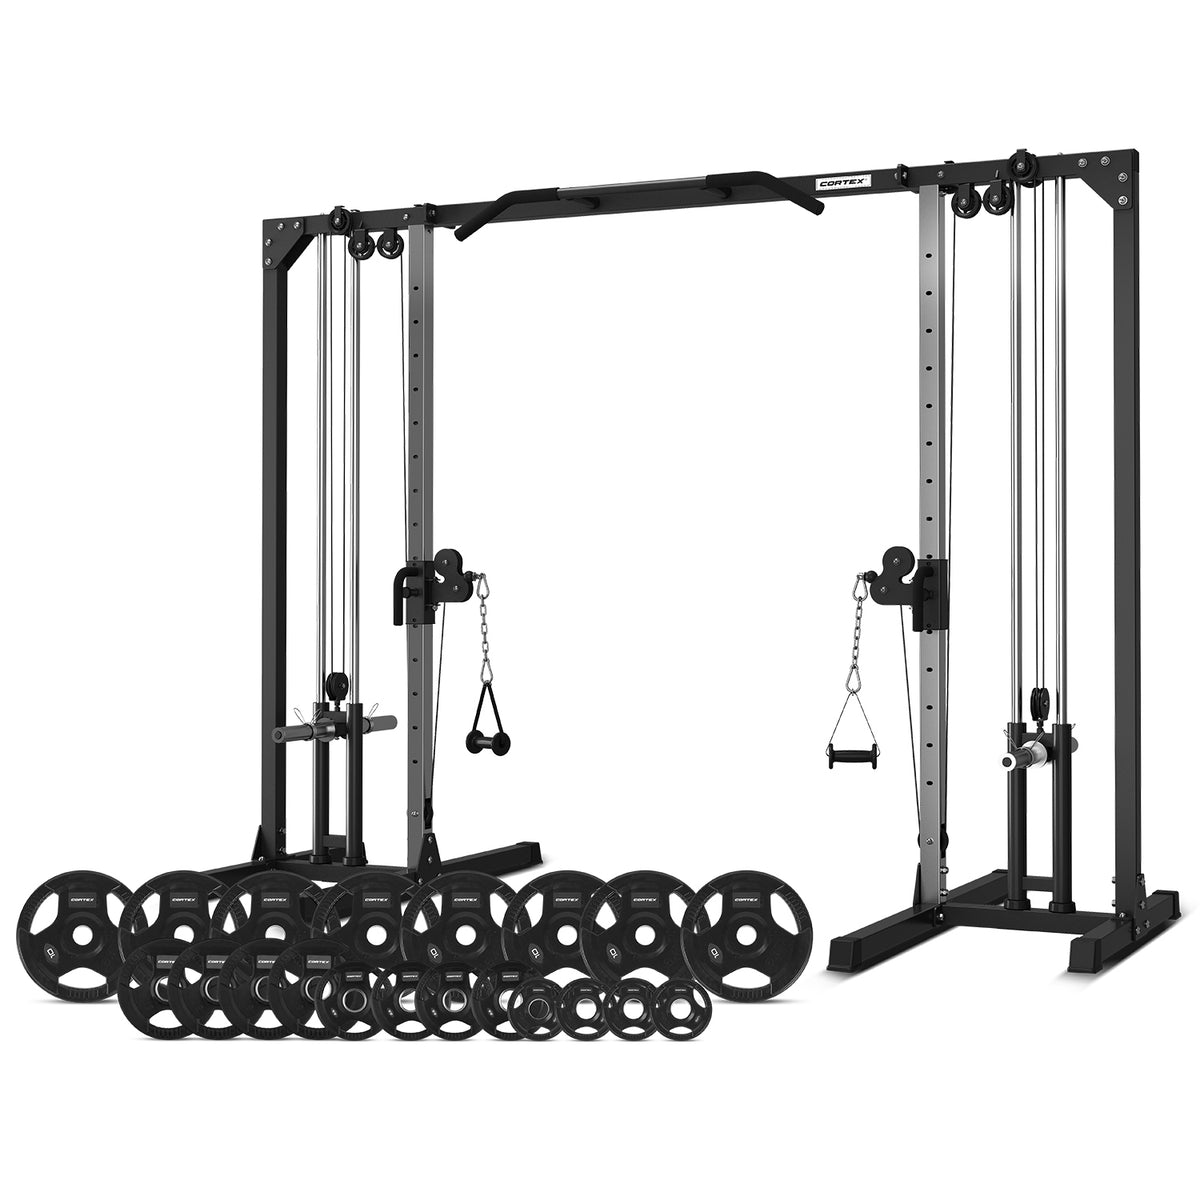 CORTEX FT-11 Plate Loaded Cable Crossover Station with 115kg Olympic Tri-Grip Weight Set